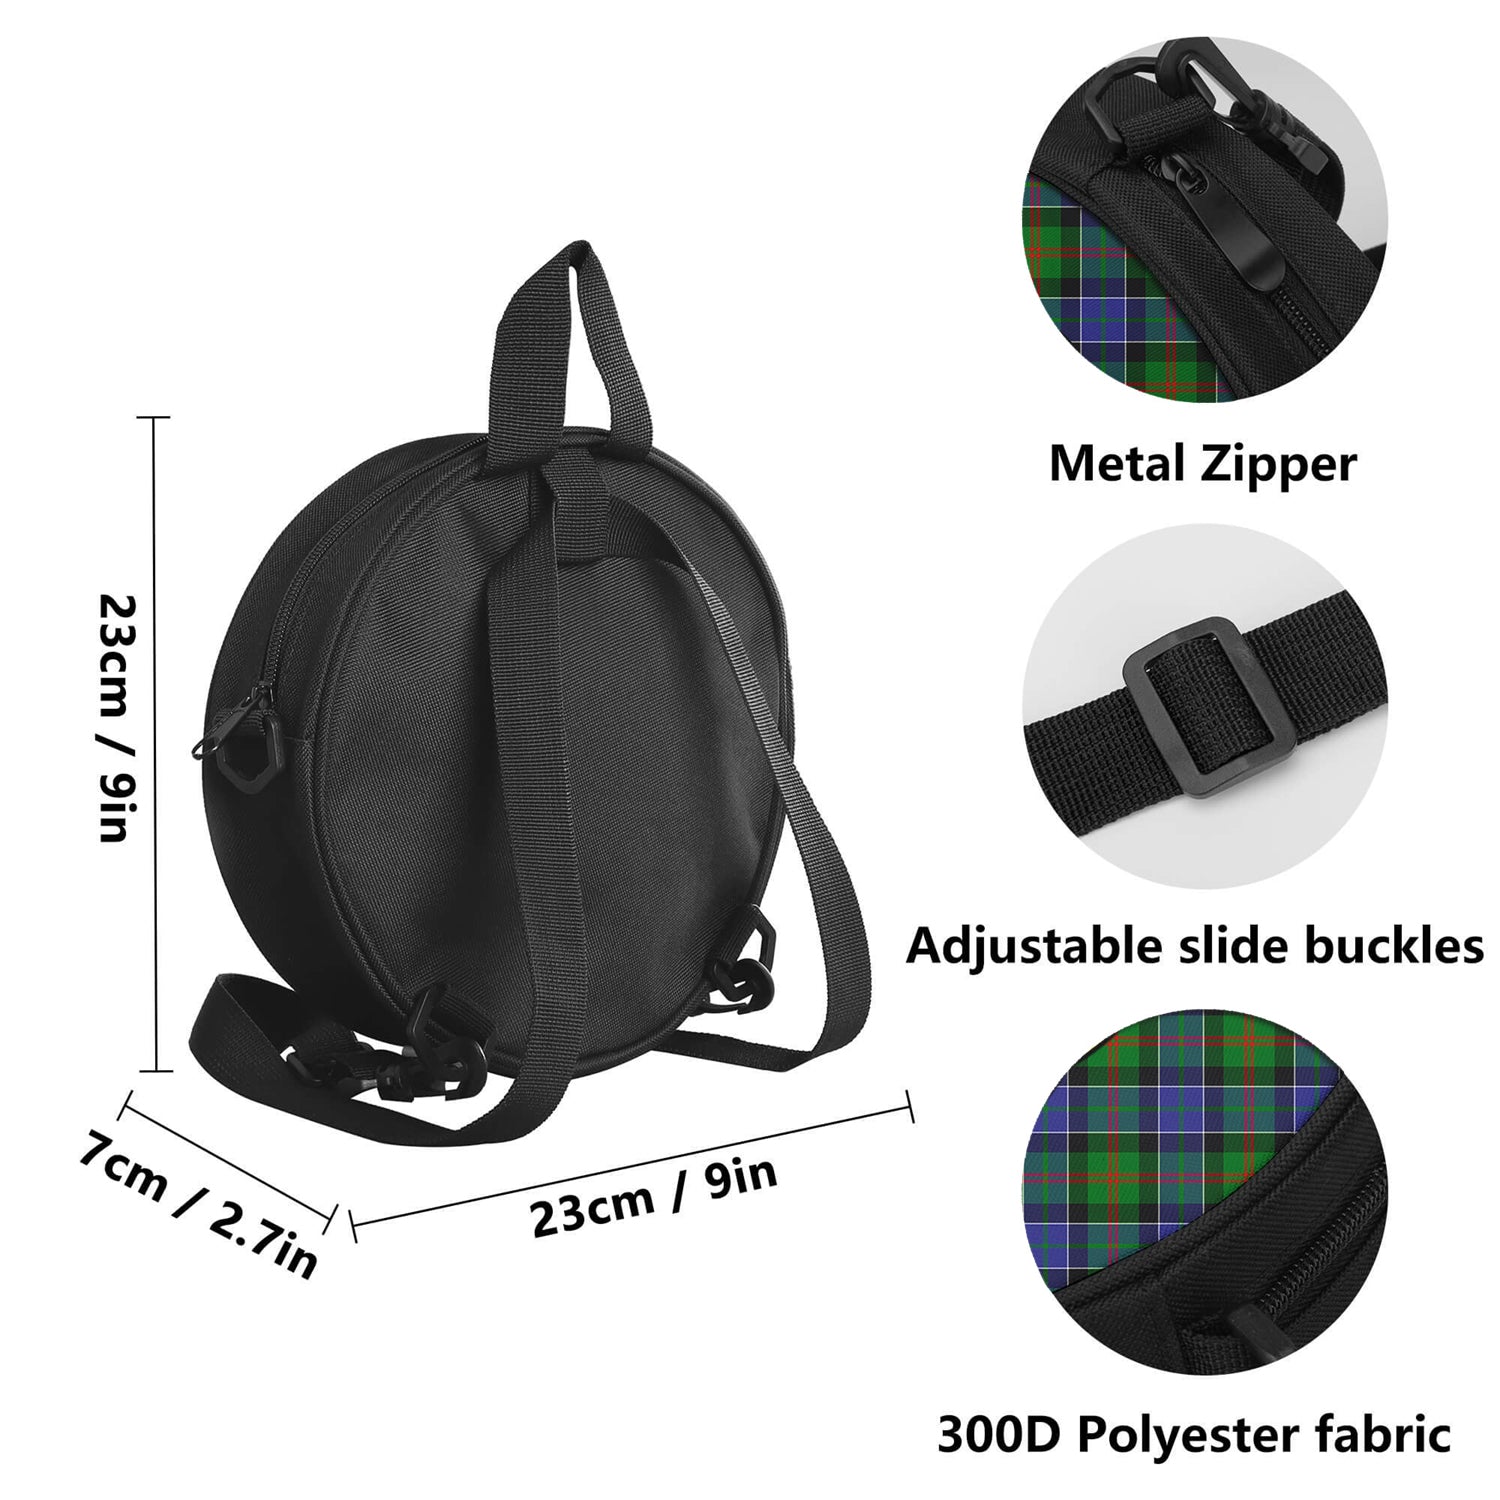 paterson-tartan-round-satchel-bags-with-family-crest